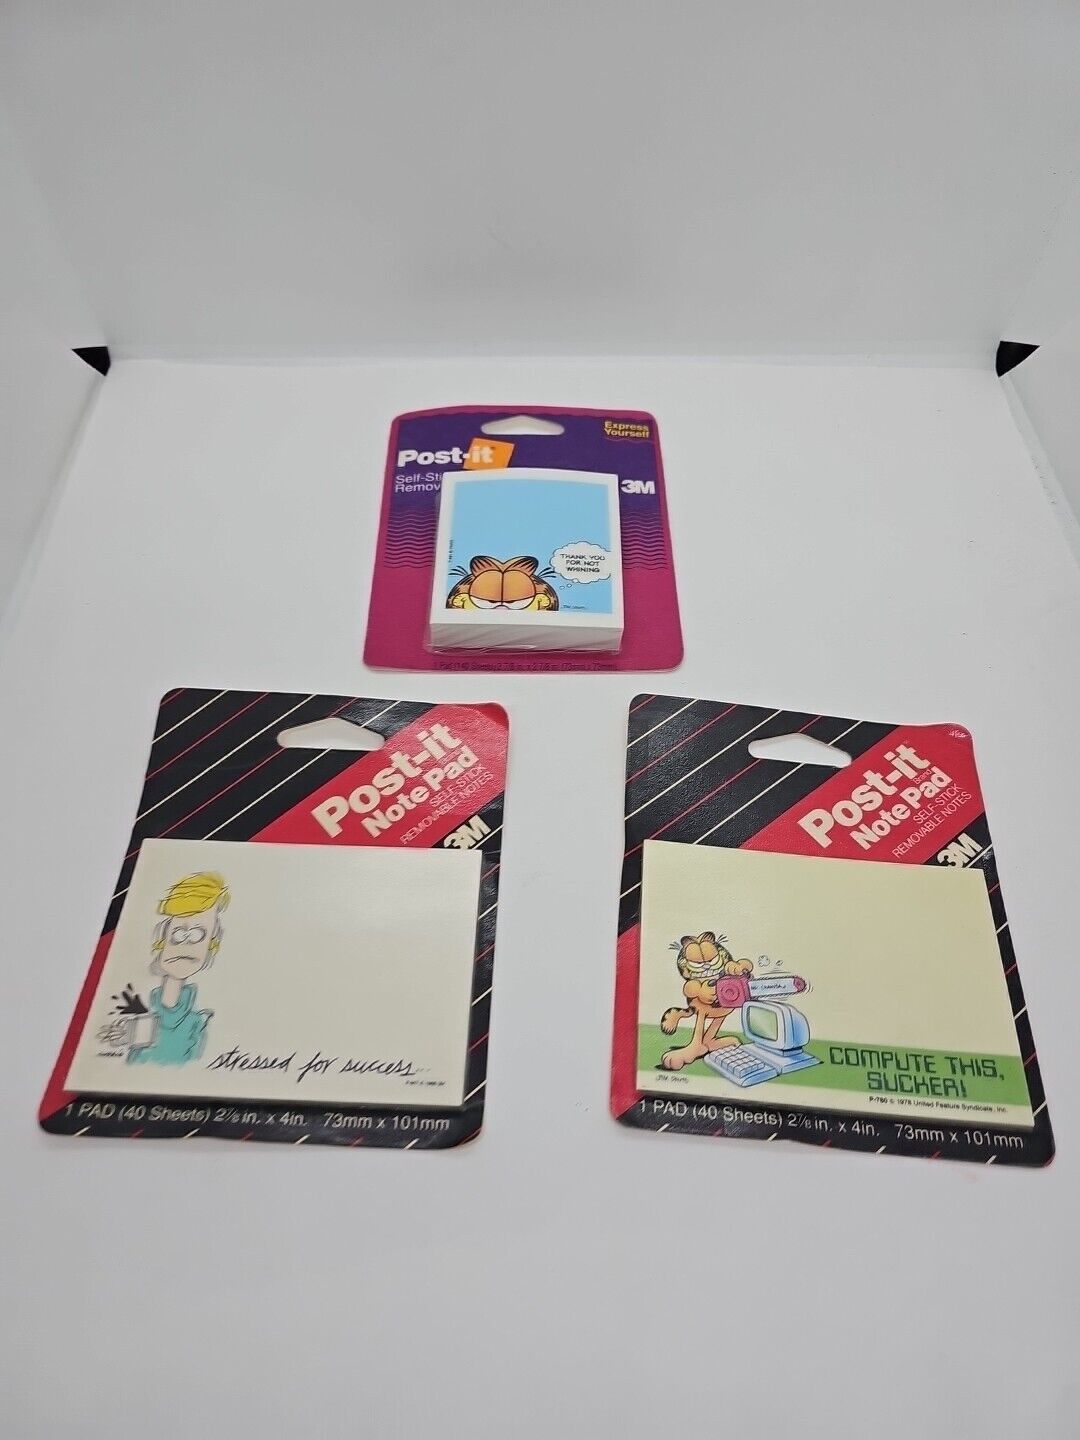 3x Garfield Post-It Pad Sticky Note Vintage 3M 1990-94 Compute This, Sucker NEW